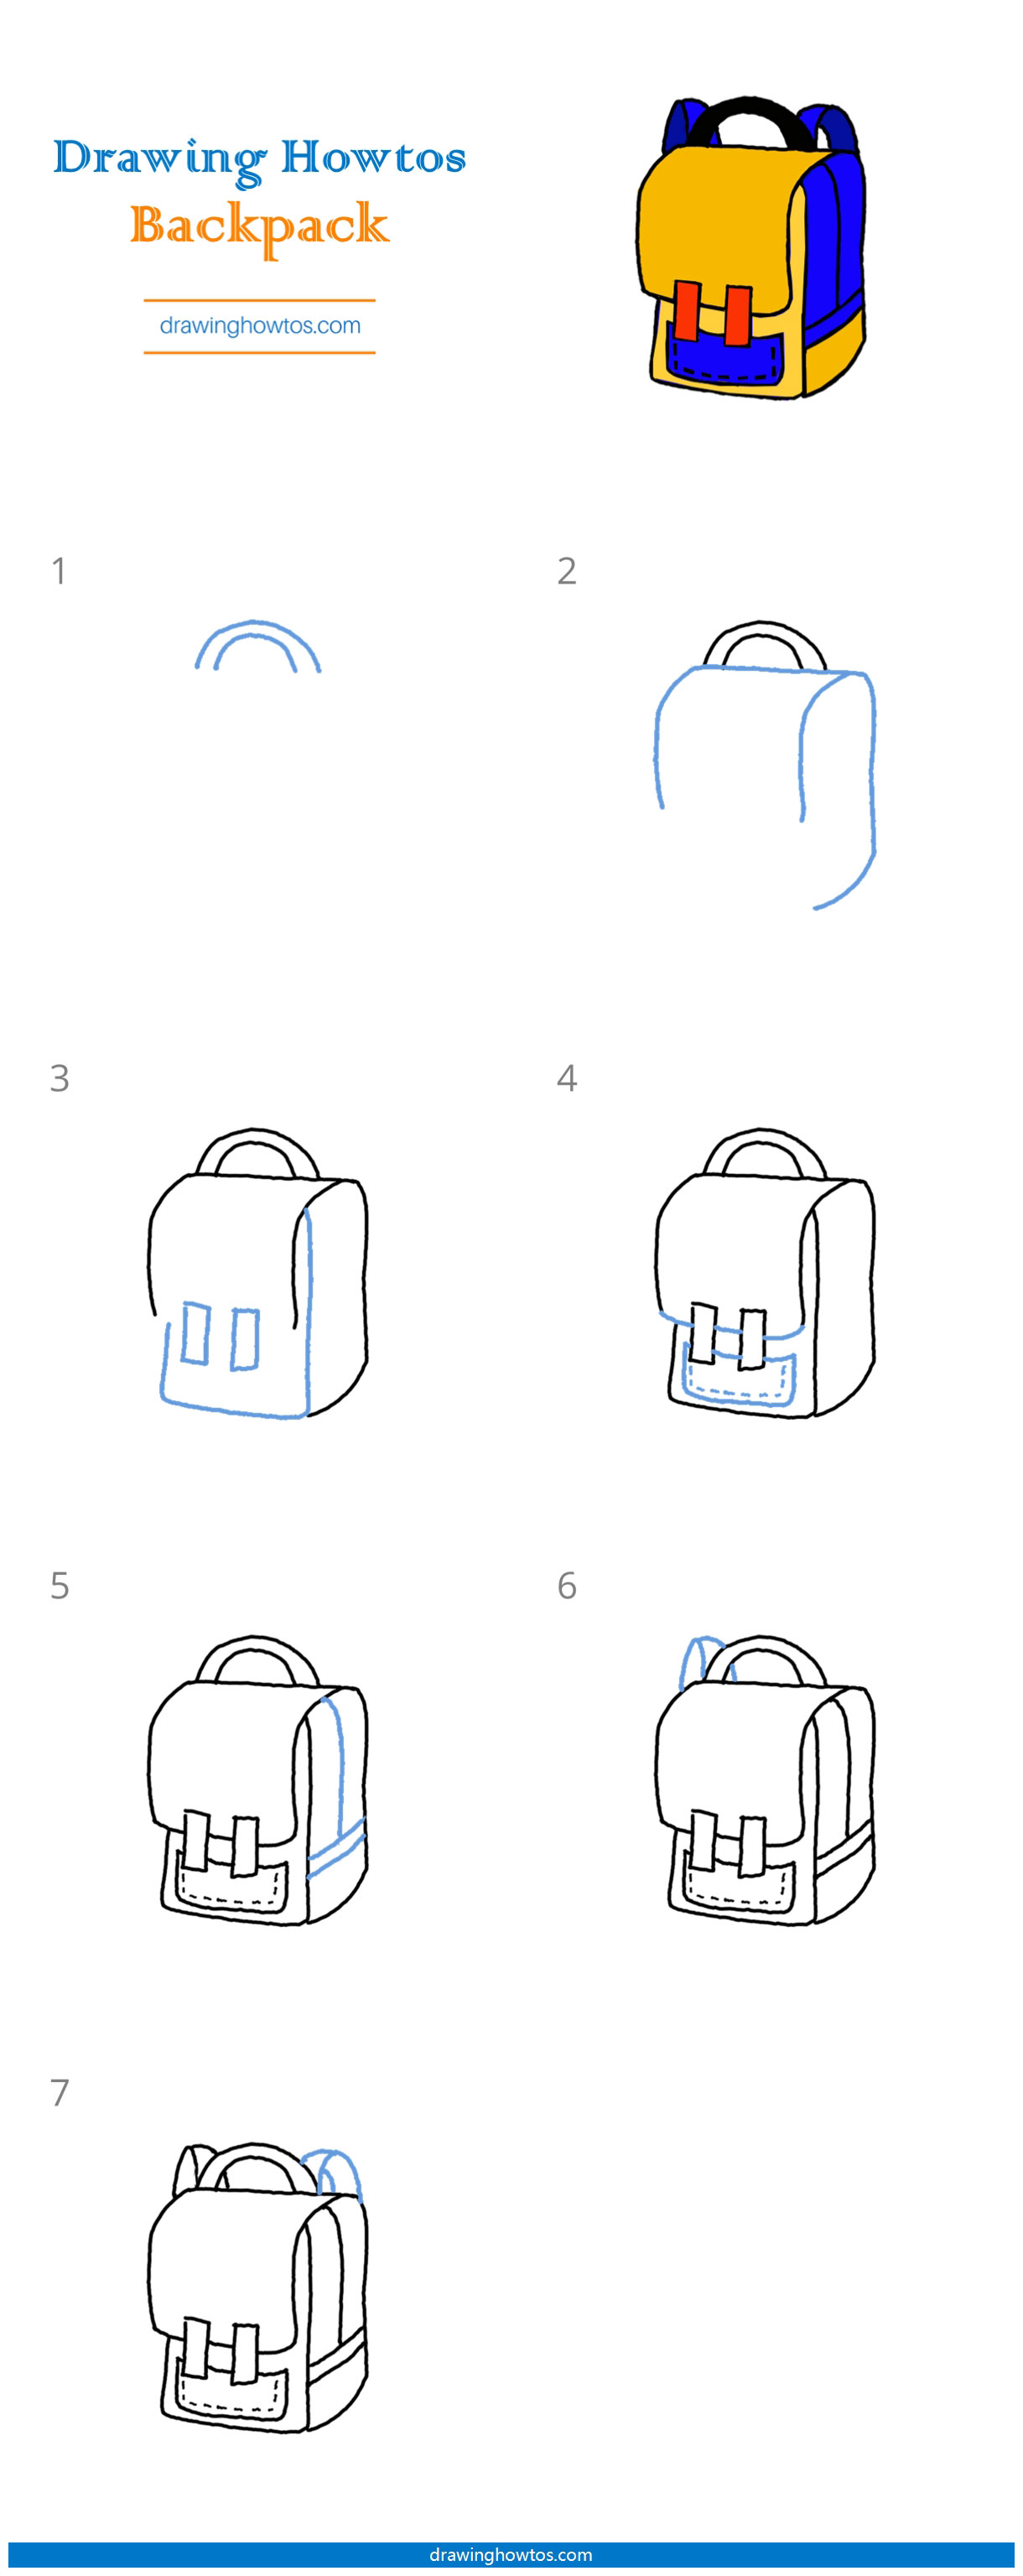 How to Draw a Backpack Step by Step